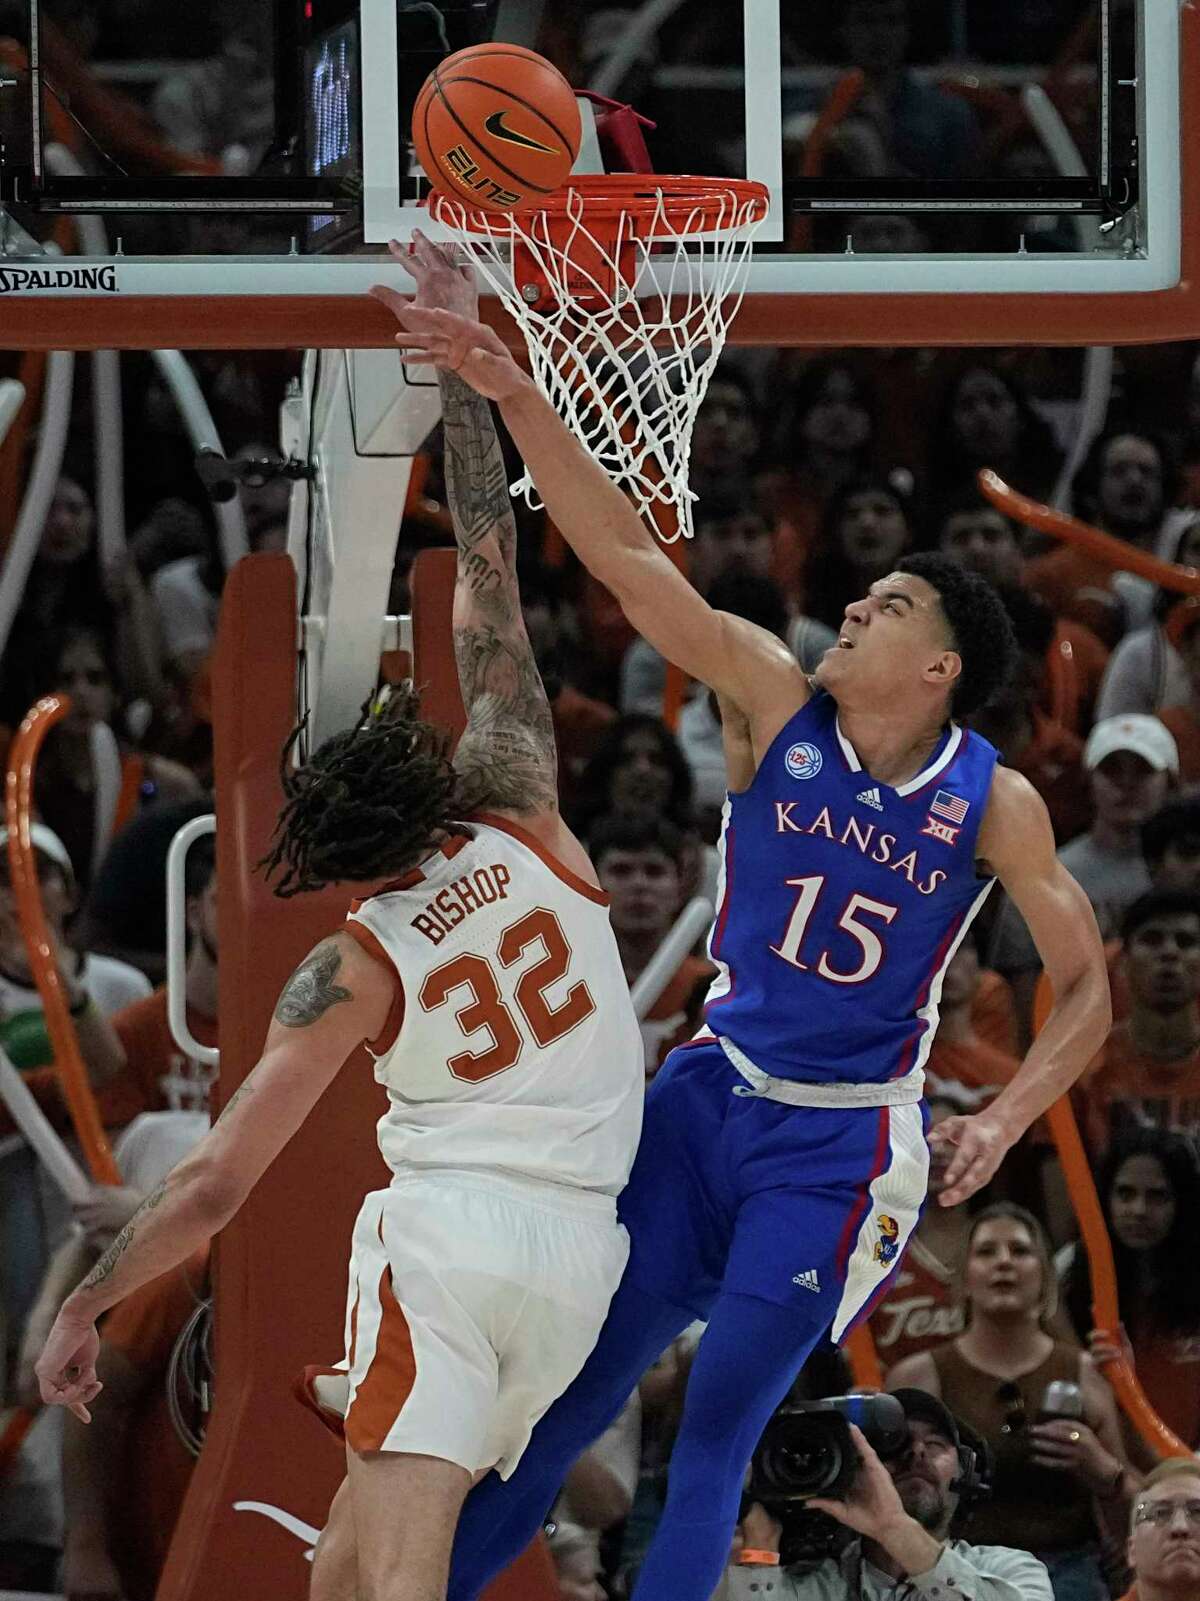 Texas forward Christian Bishop (32) is blocked by Kansas guard Kevin McCullar Jr. (15) during the first half of an NCAA college basketball game in Austin, Texas, Saturday, March 4, 2023. (AP Photo/Eric Gay)